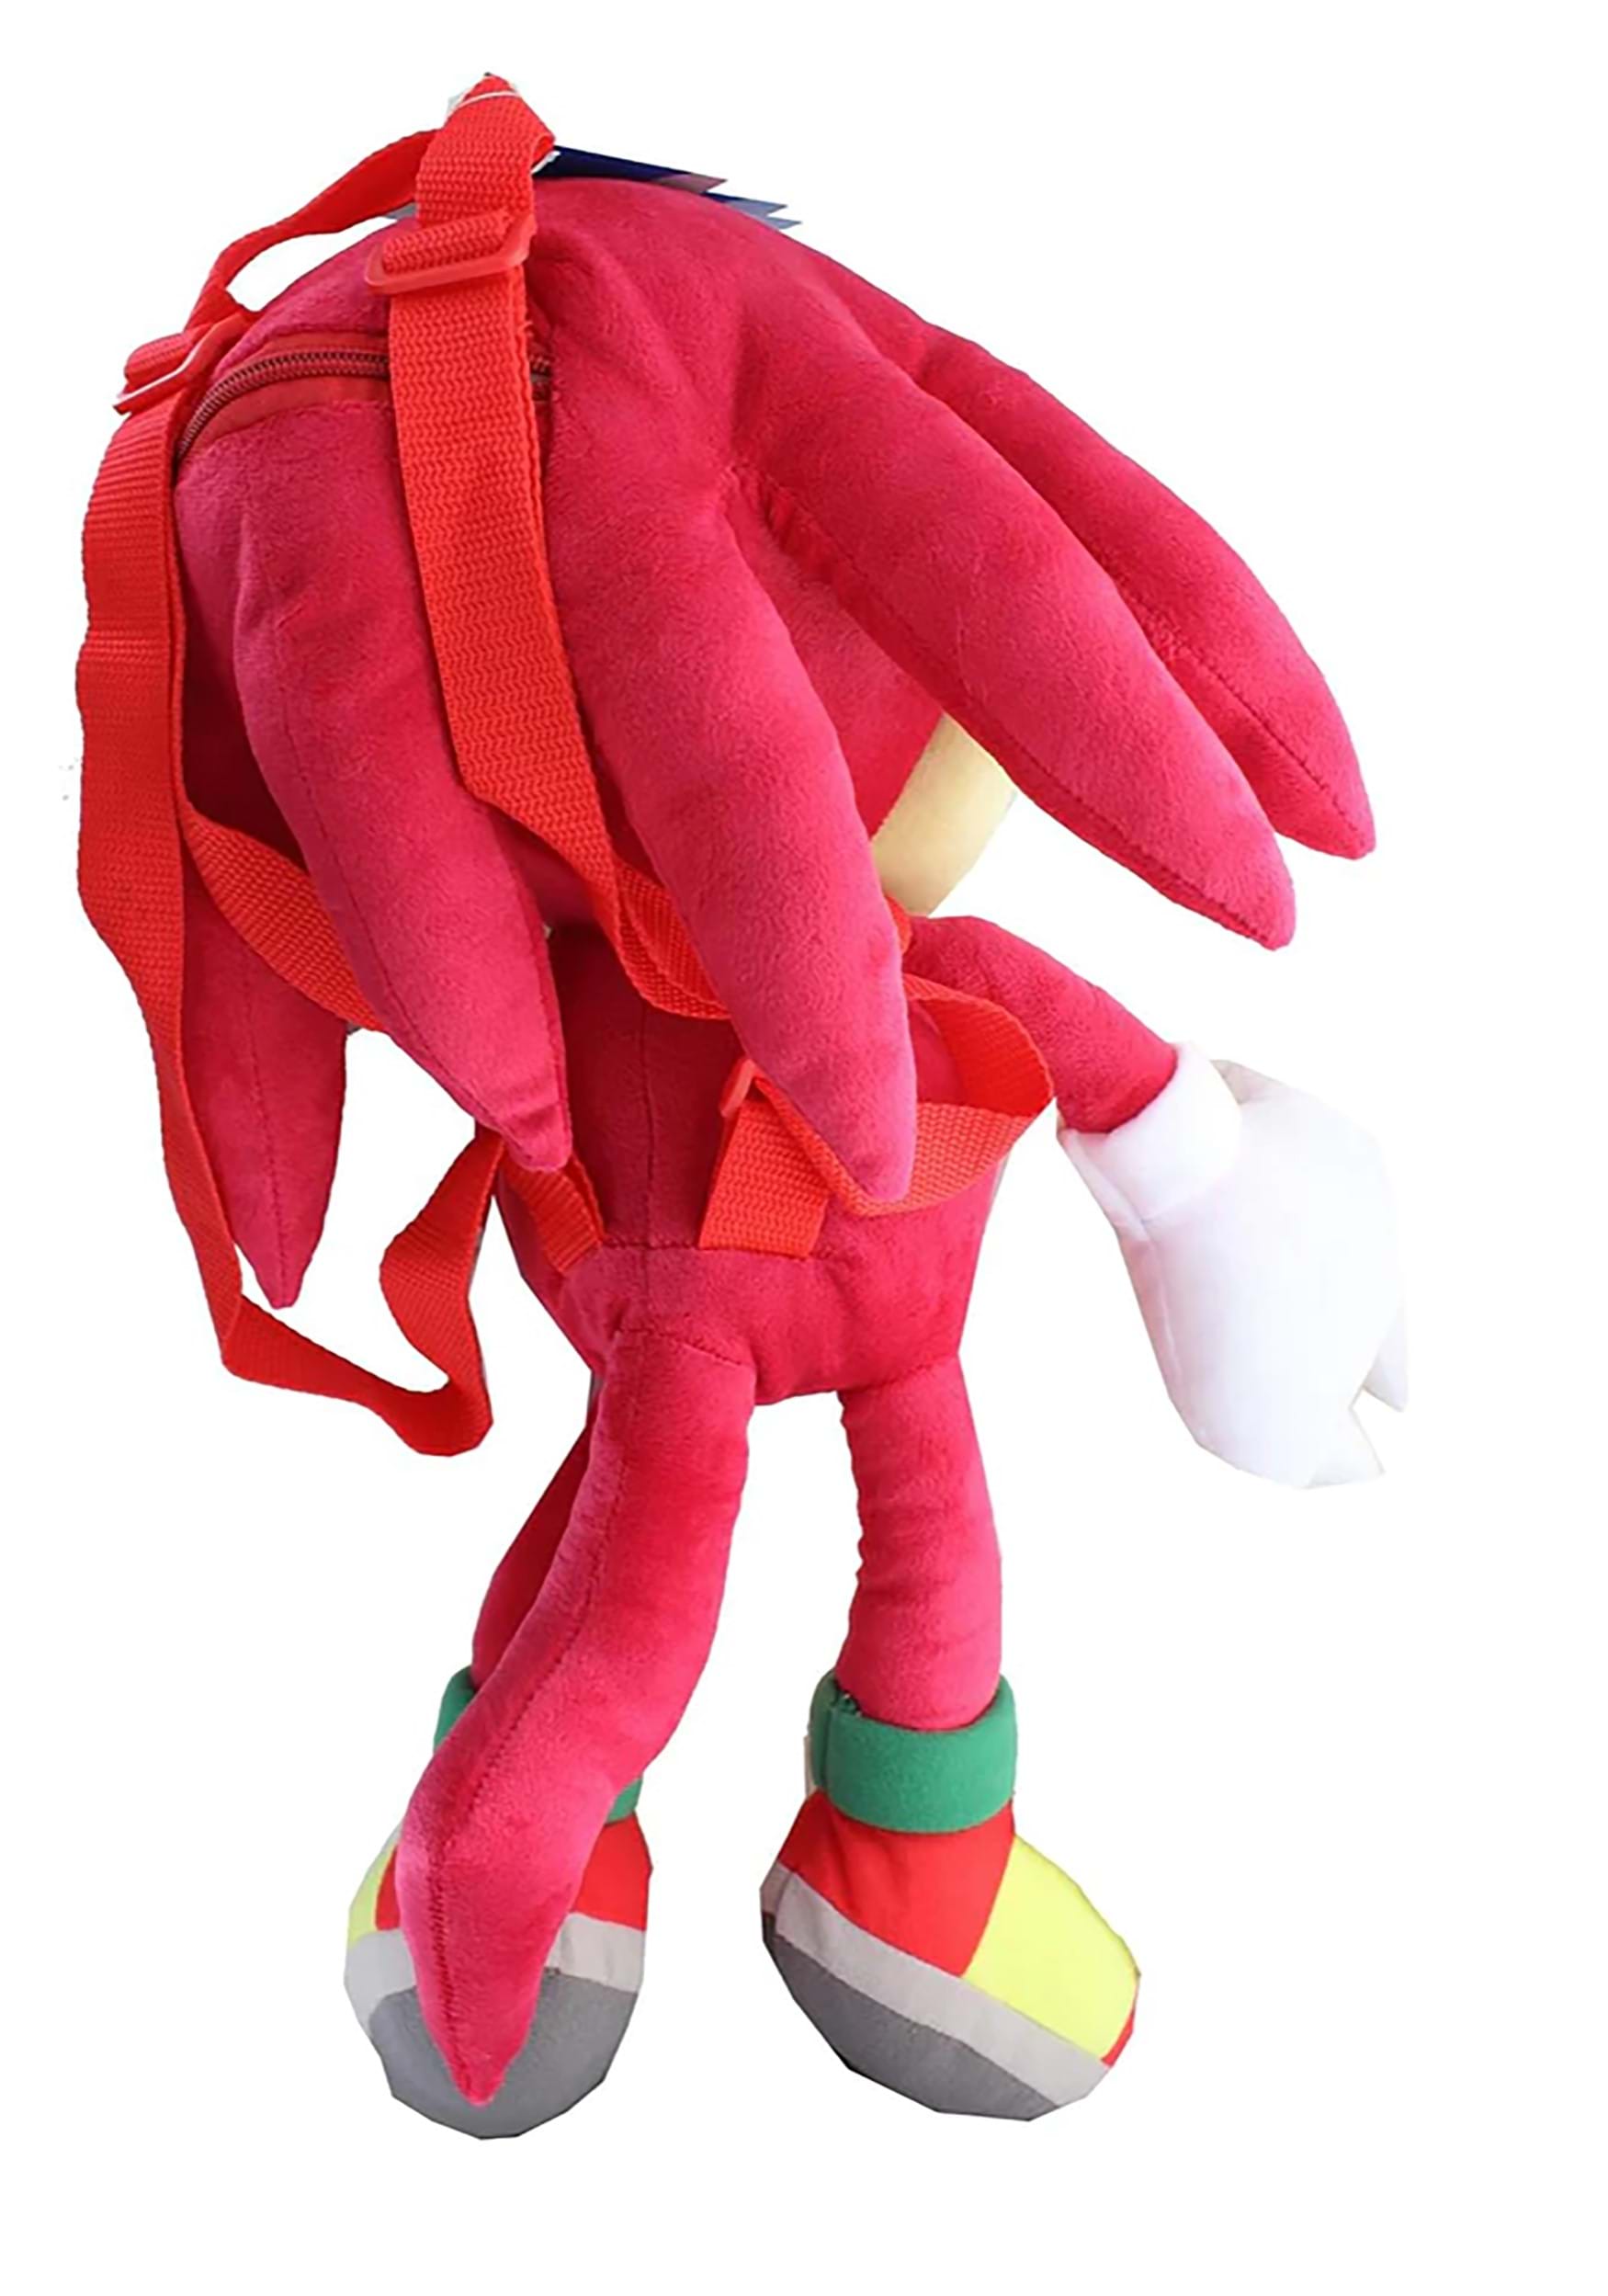 https://images.fun.com/products/86829/2-1-241007/sonic-knuckles-18-inch-plush-backpack-alt-2.jpg